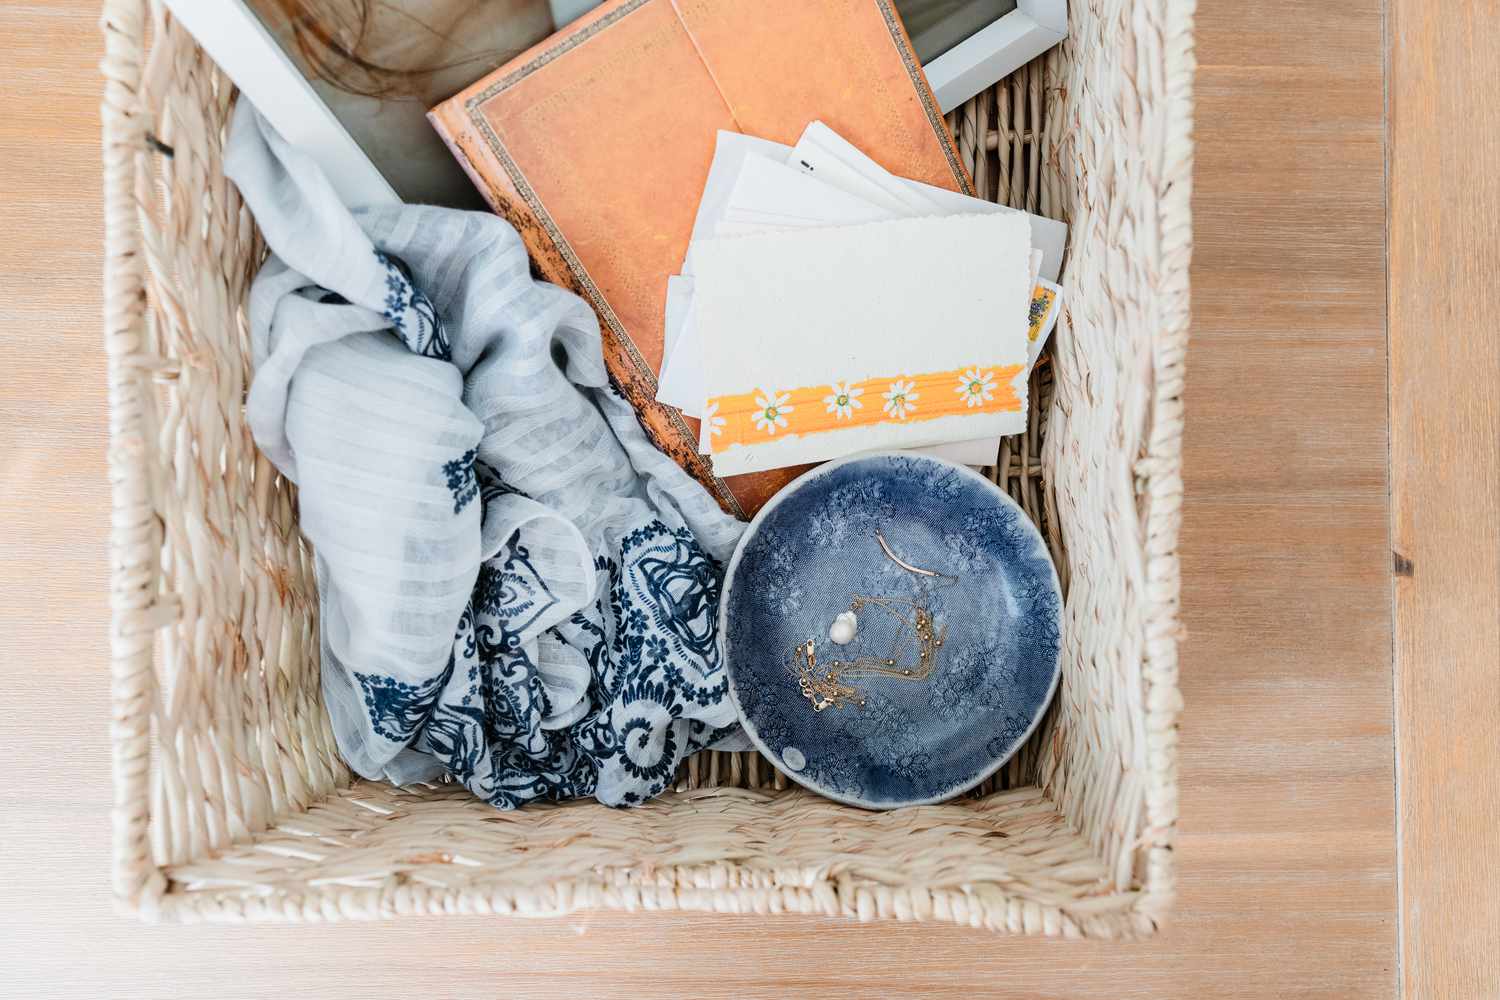 Sentimental items separated in wicker basket for keeping